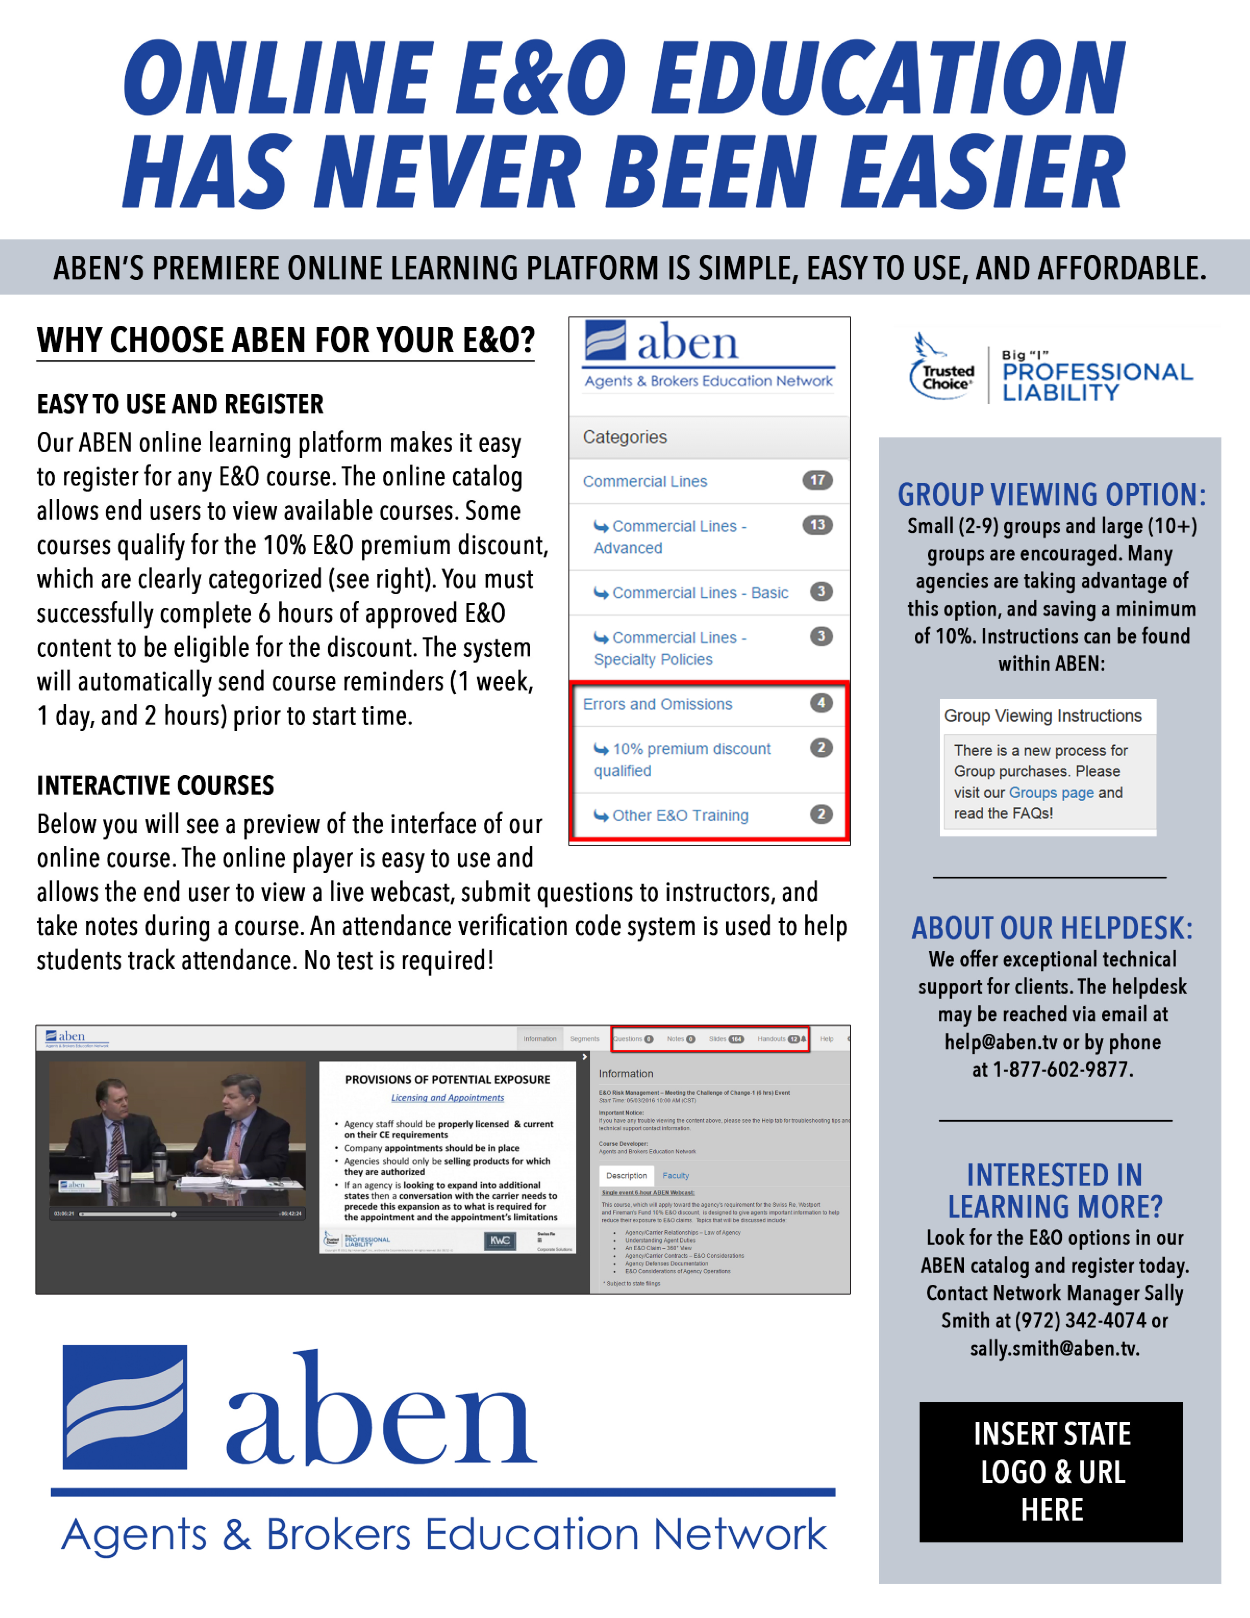 ABEN-flyer-EO_for_end_users_FINAL.jpg